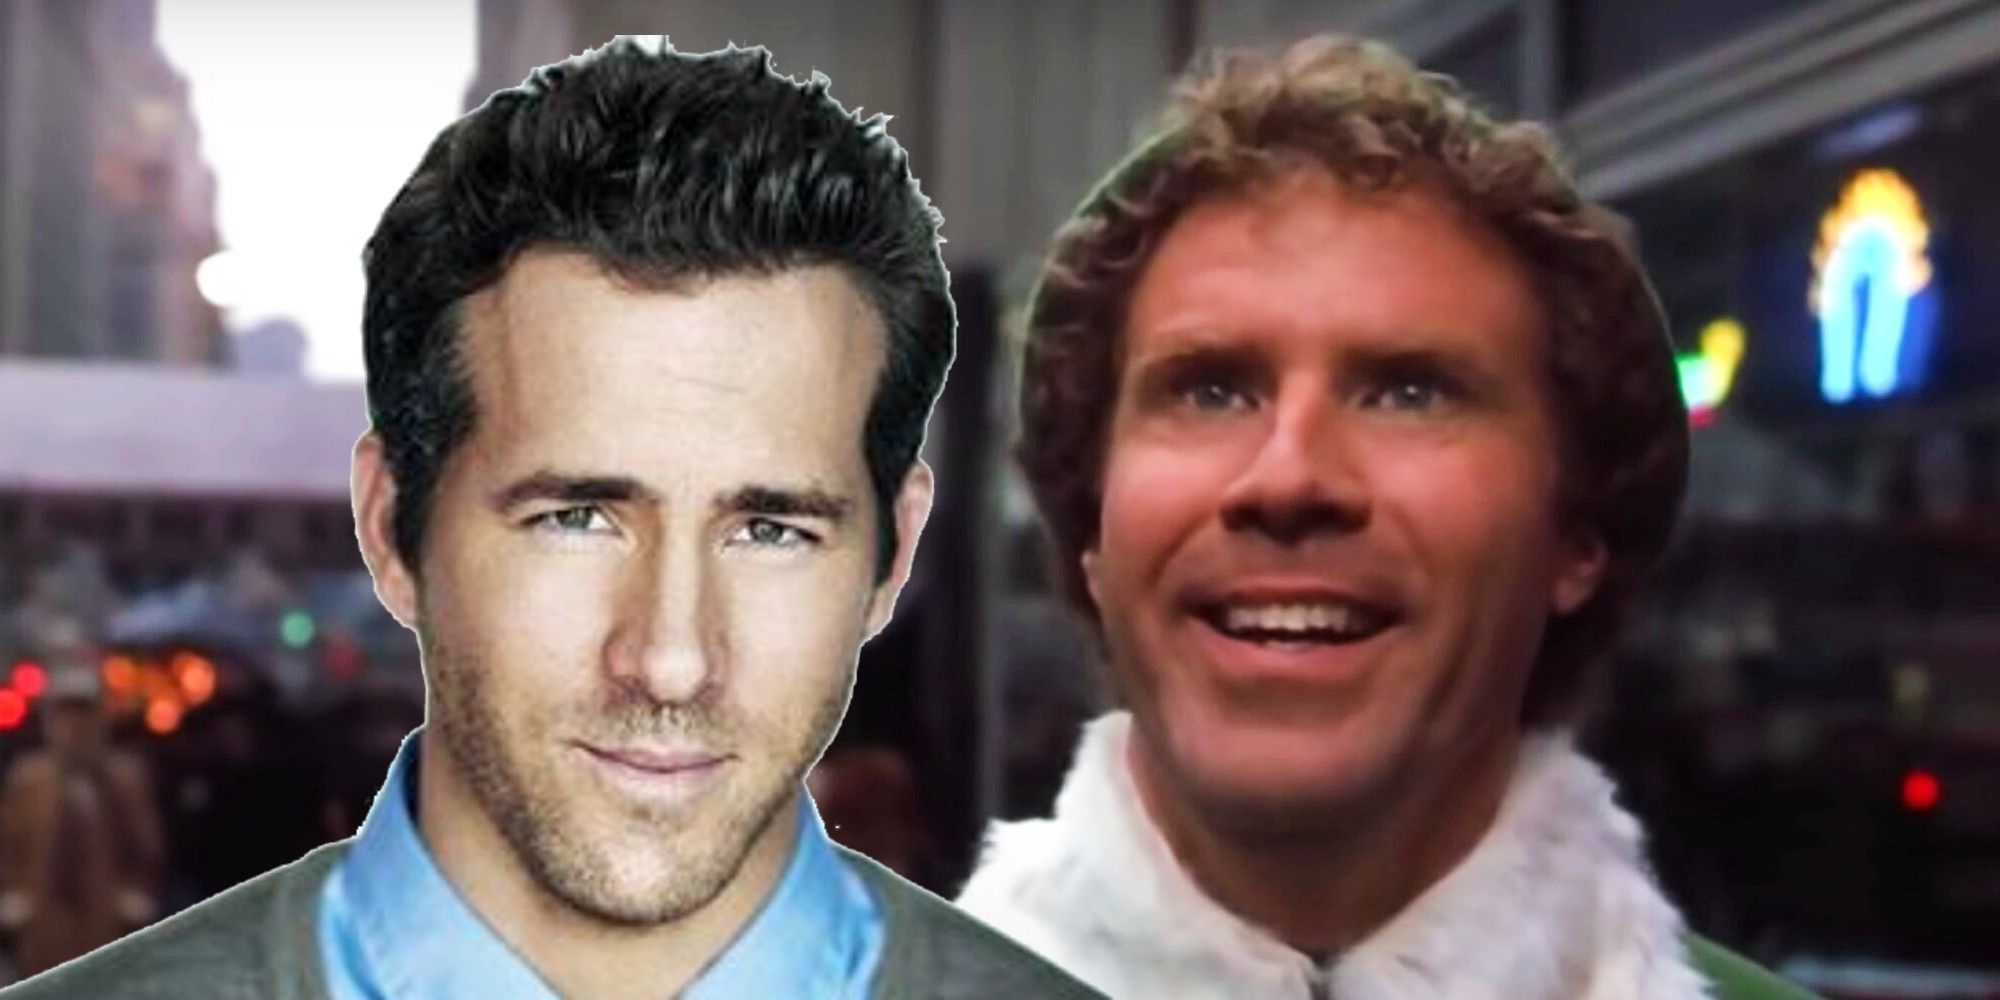 Ryan Reynolds and Will Ferrell Filming Their New Christmas Musical